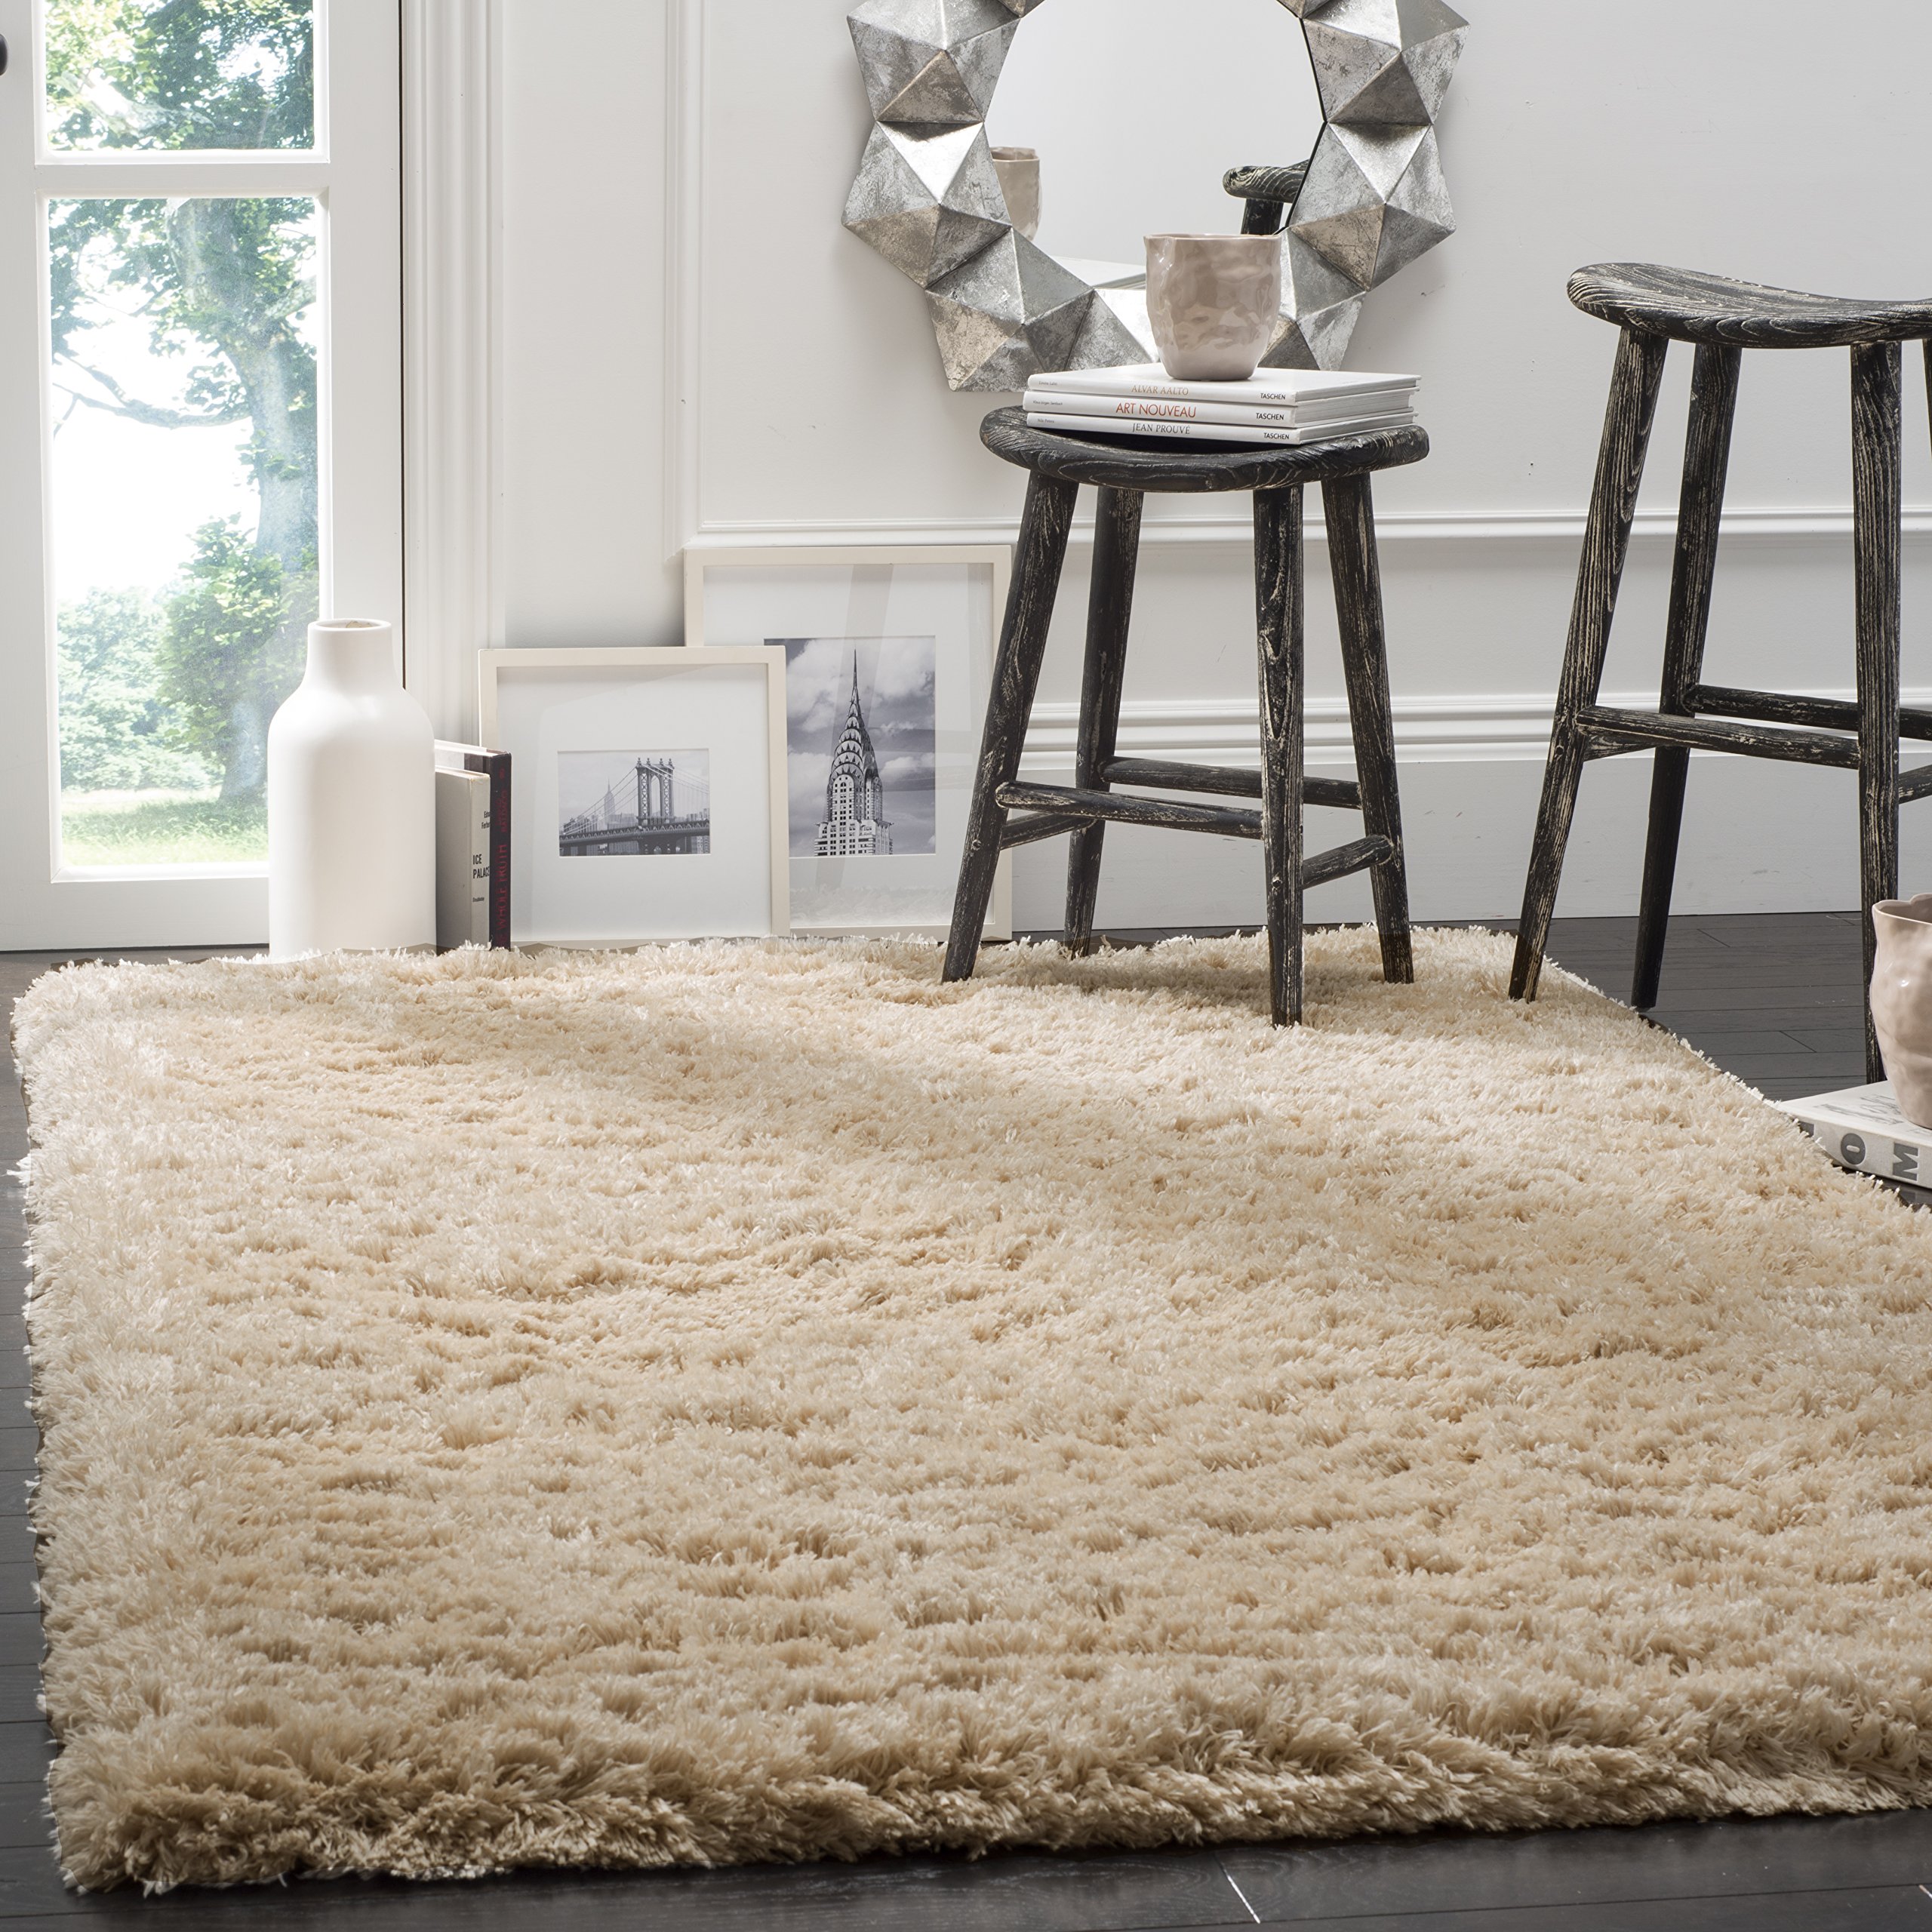 Safavieh Polar Shag Collection Area Rug - 10' x 14', Light Beige, Solid Glam Design, Non-Shedding & Easy Care, 3-inch Thick Ideal for High Traffic Areas in Living Room, Bedroom (PSG800A)